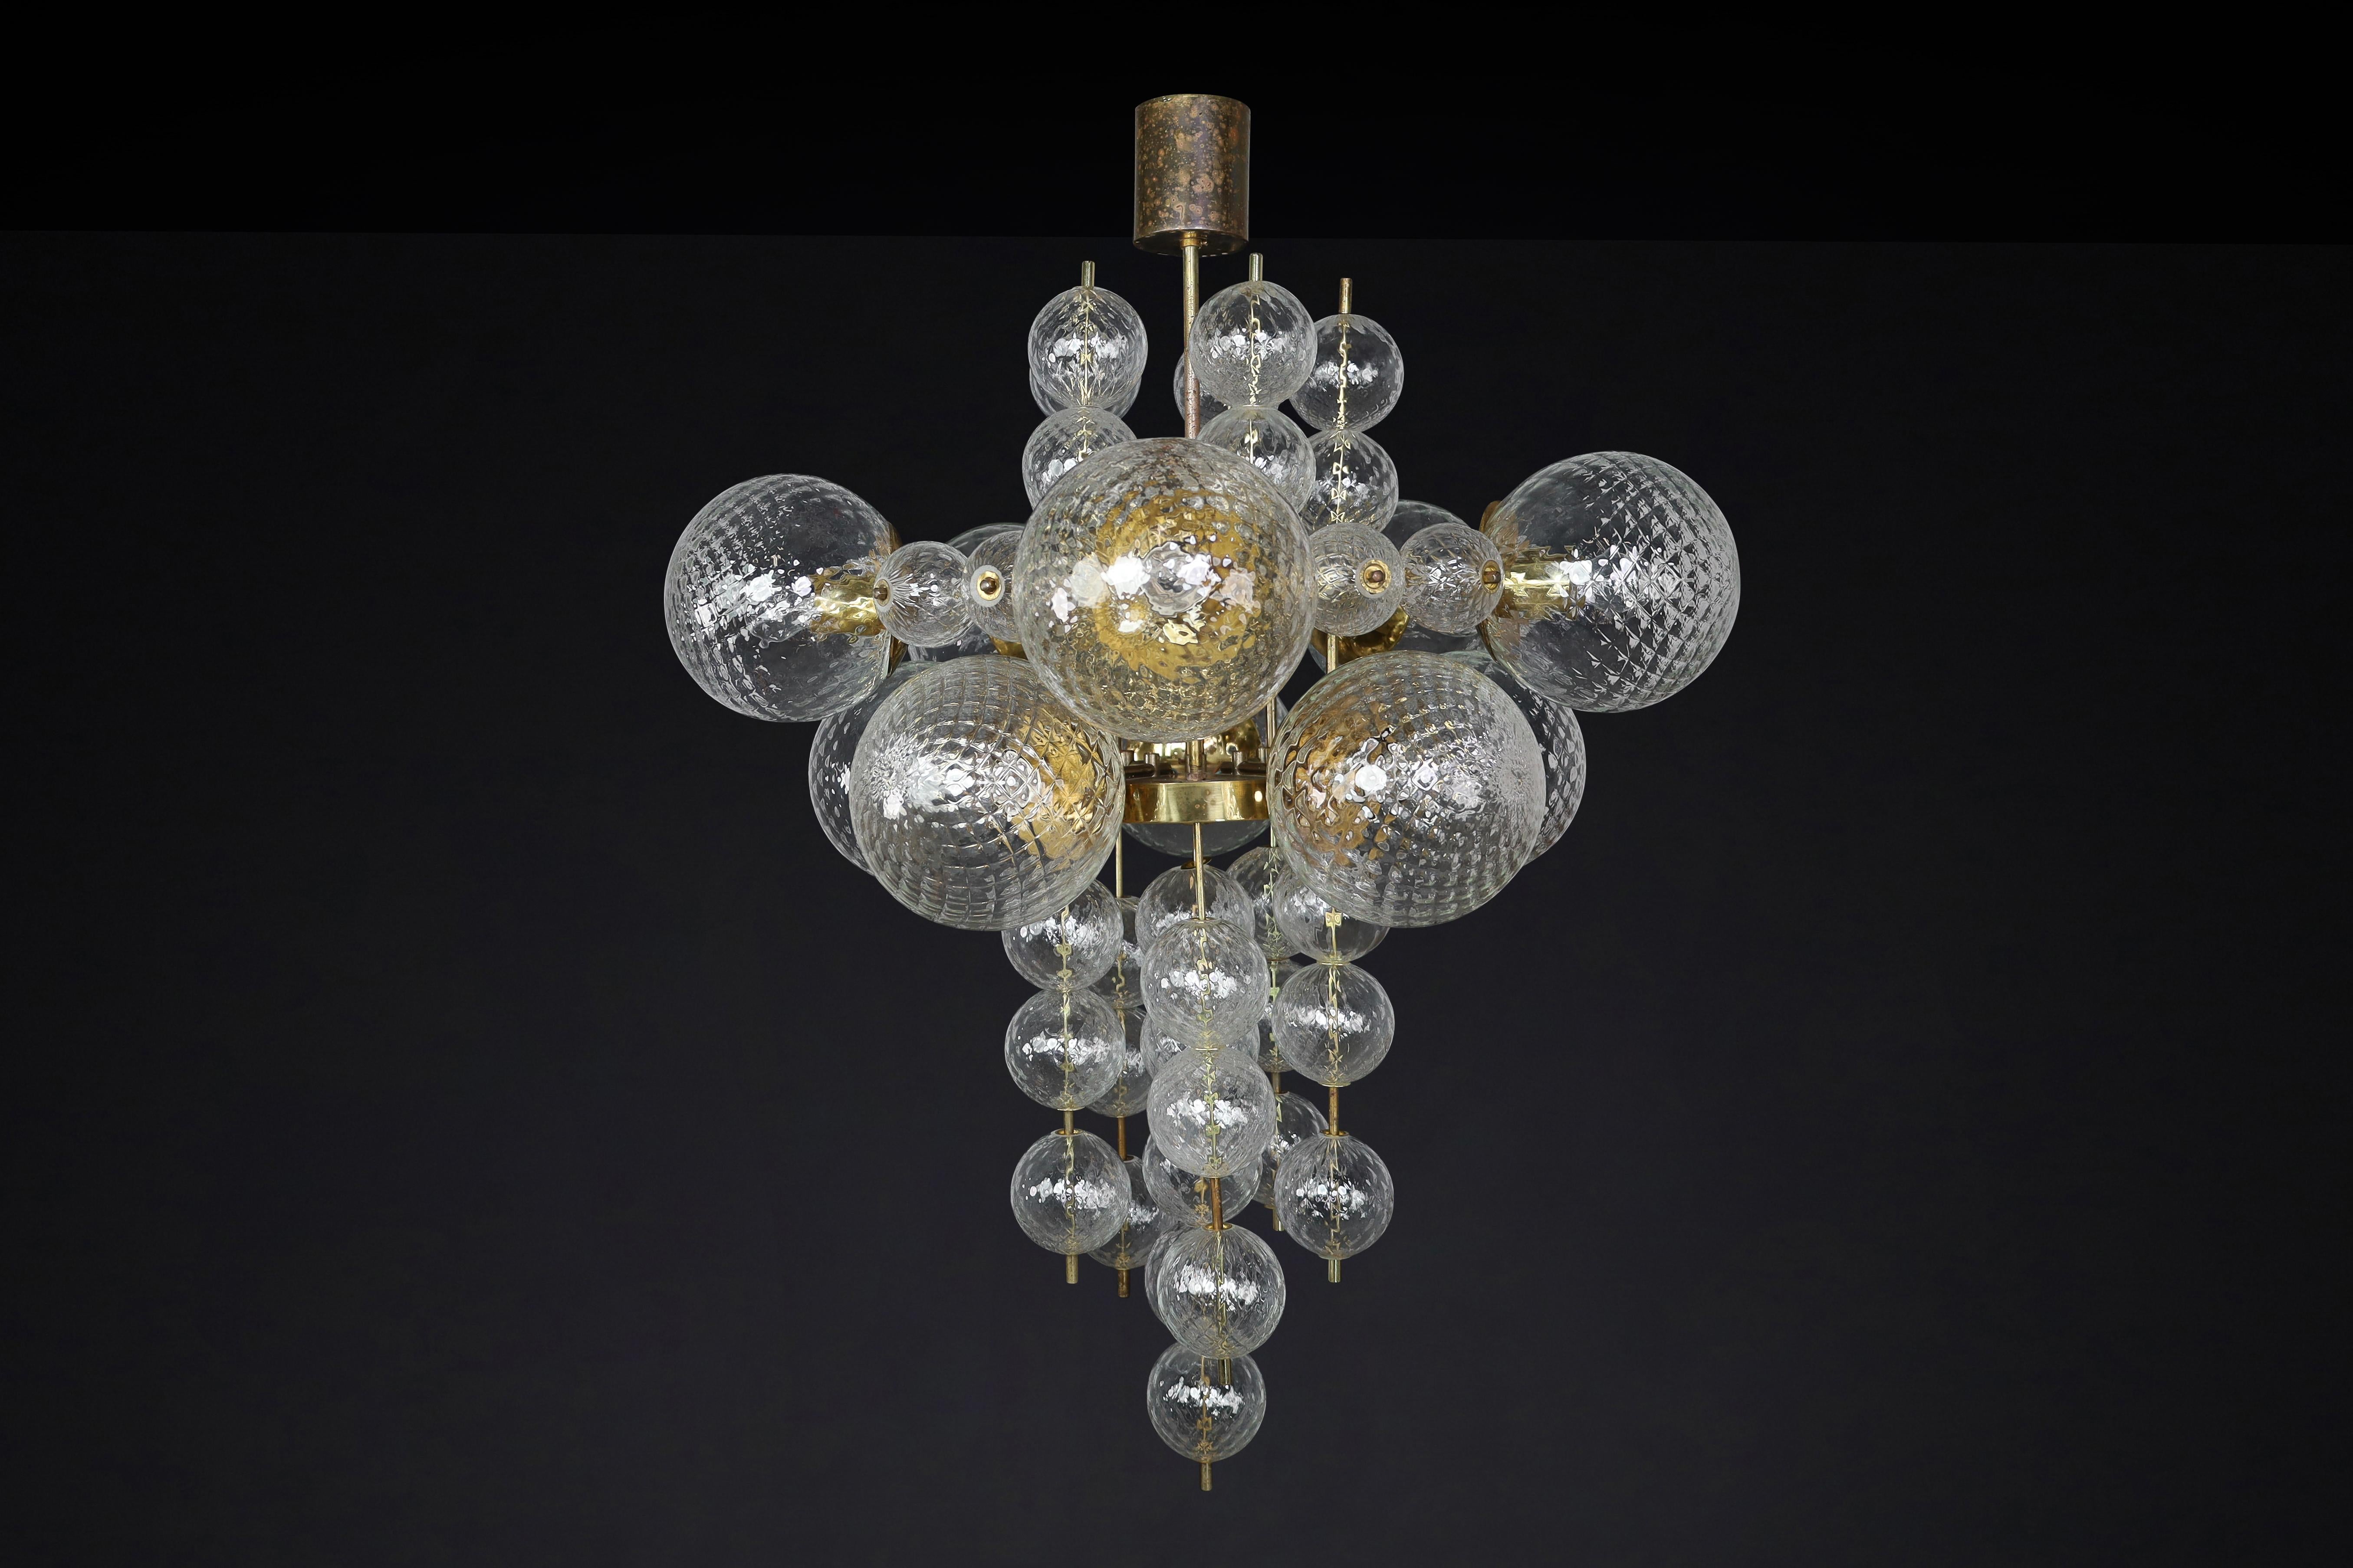  Chandelier with Patinated brass fixture and hand-blowed glass globes  CZ 1960s For Sale 2